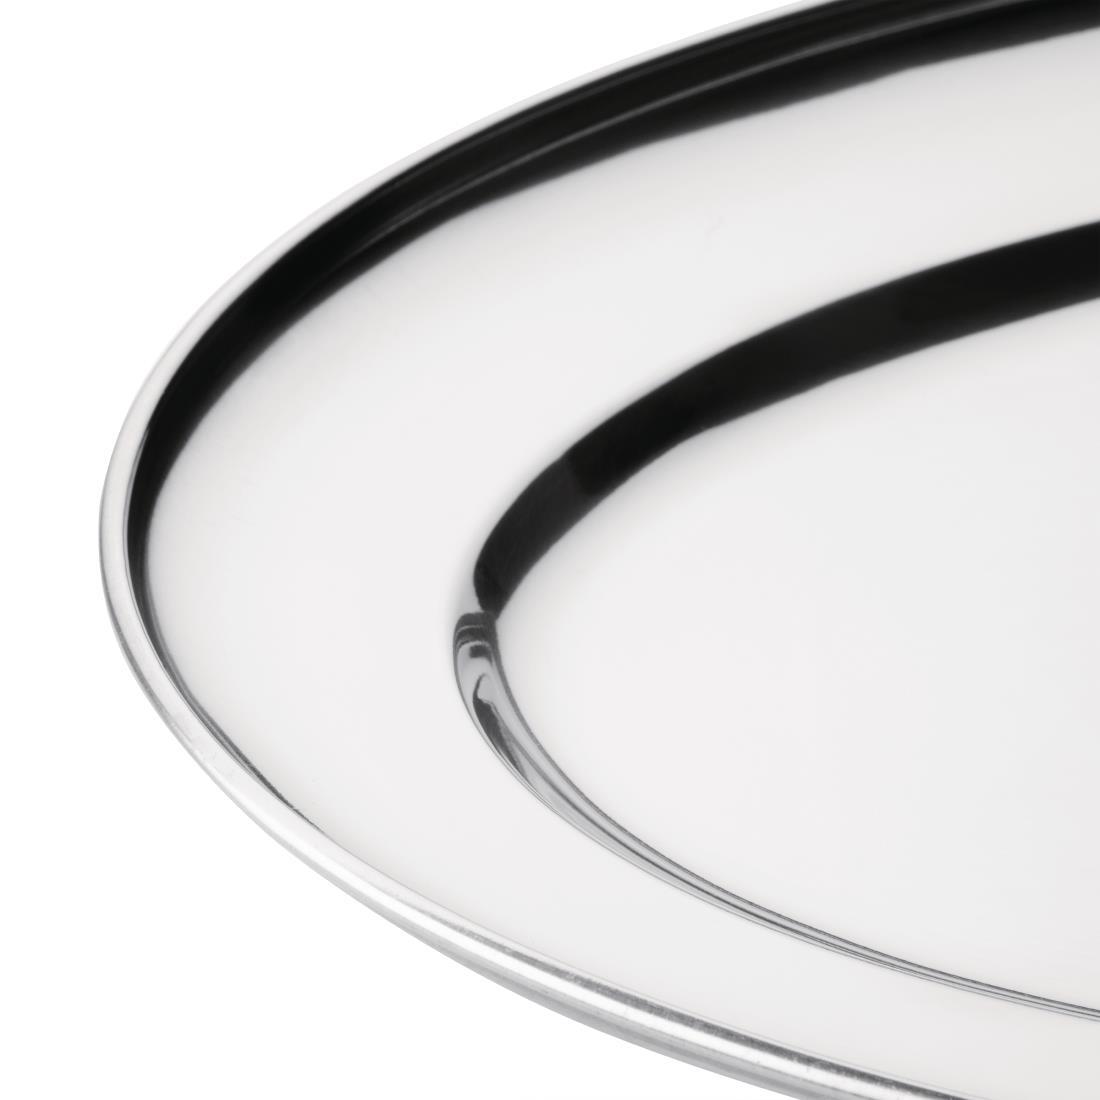 Olympia Stainless Steel Oval Serving Tray 500mm - K367  - 3